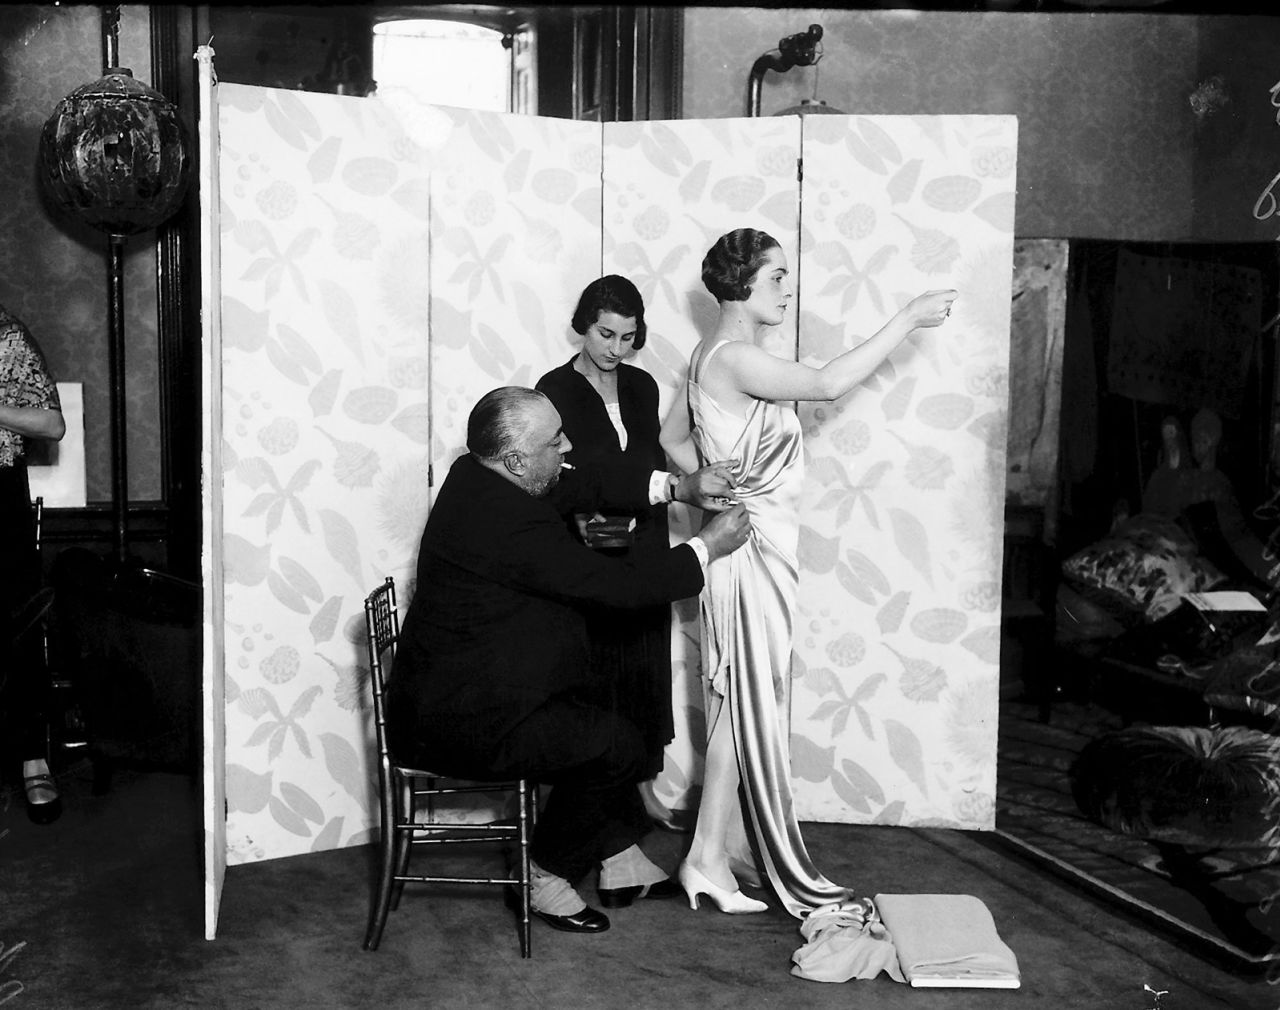 The fashion designer Paul Poiret is pictured in his studio with a fit model, as he drapes a bias-cut silk model onto her body. He is being helped by an assistant.